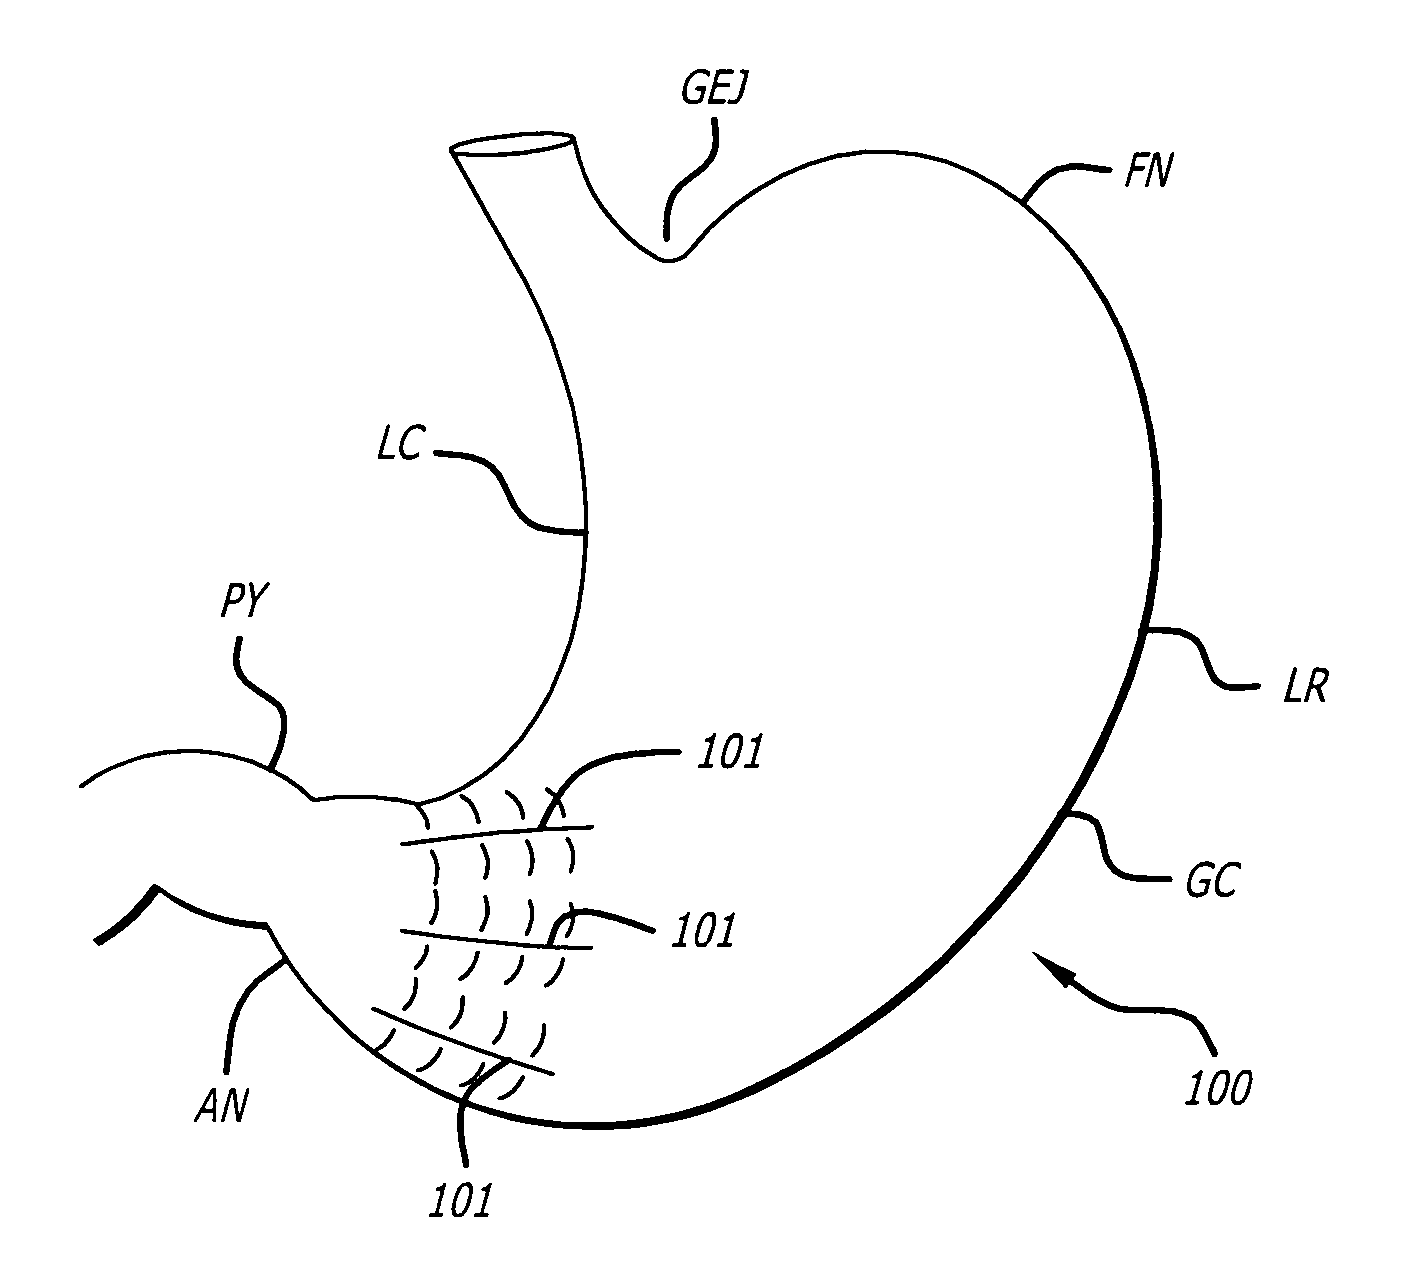 Method and devices for modifying the function of a body organ